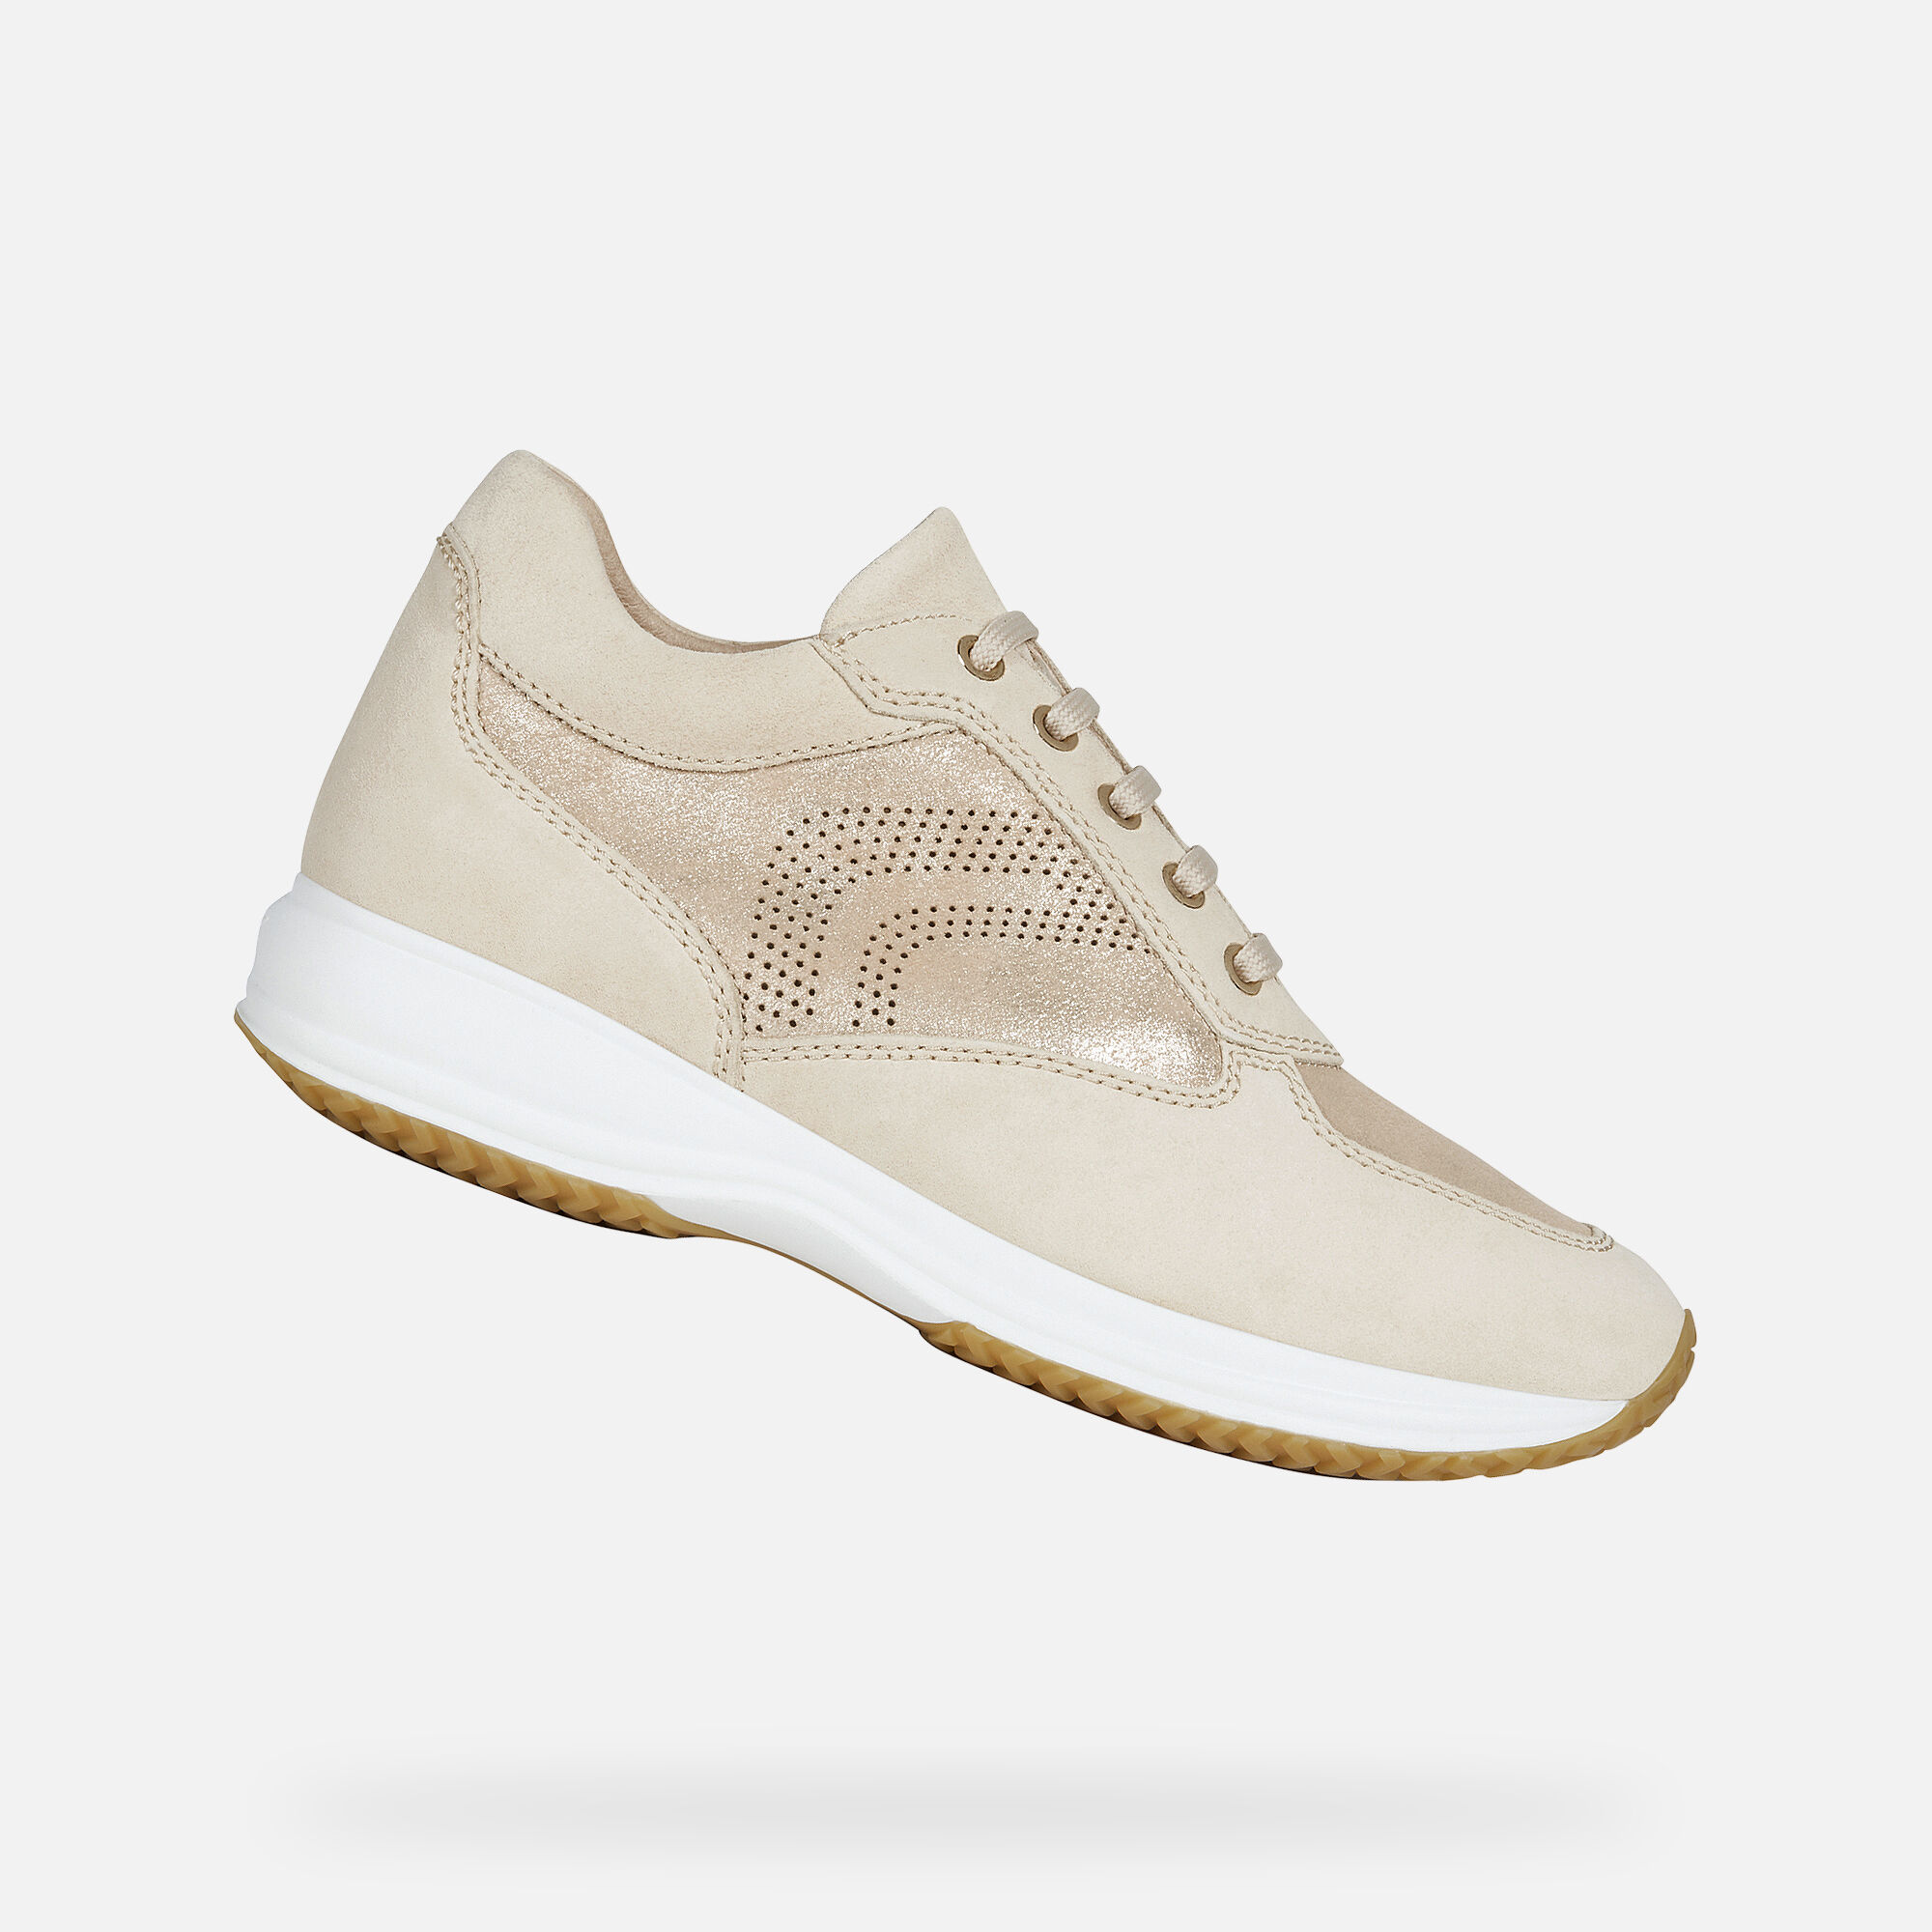 Geox DONNA HAPPY Woman: Sand Sneakers | FW20/21 Geox®